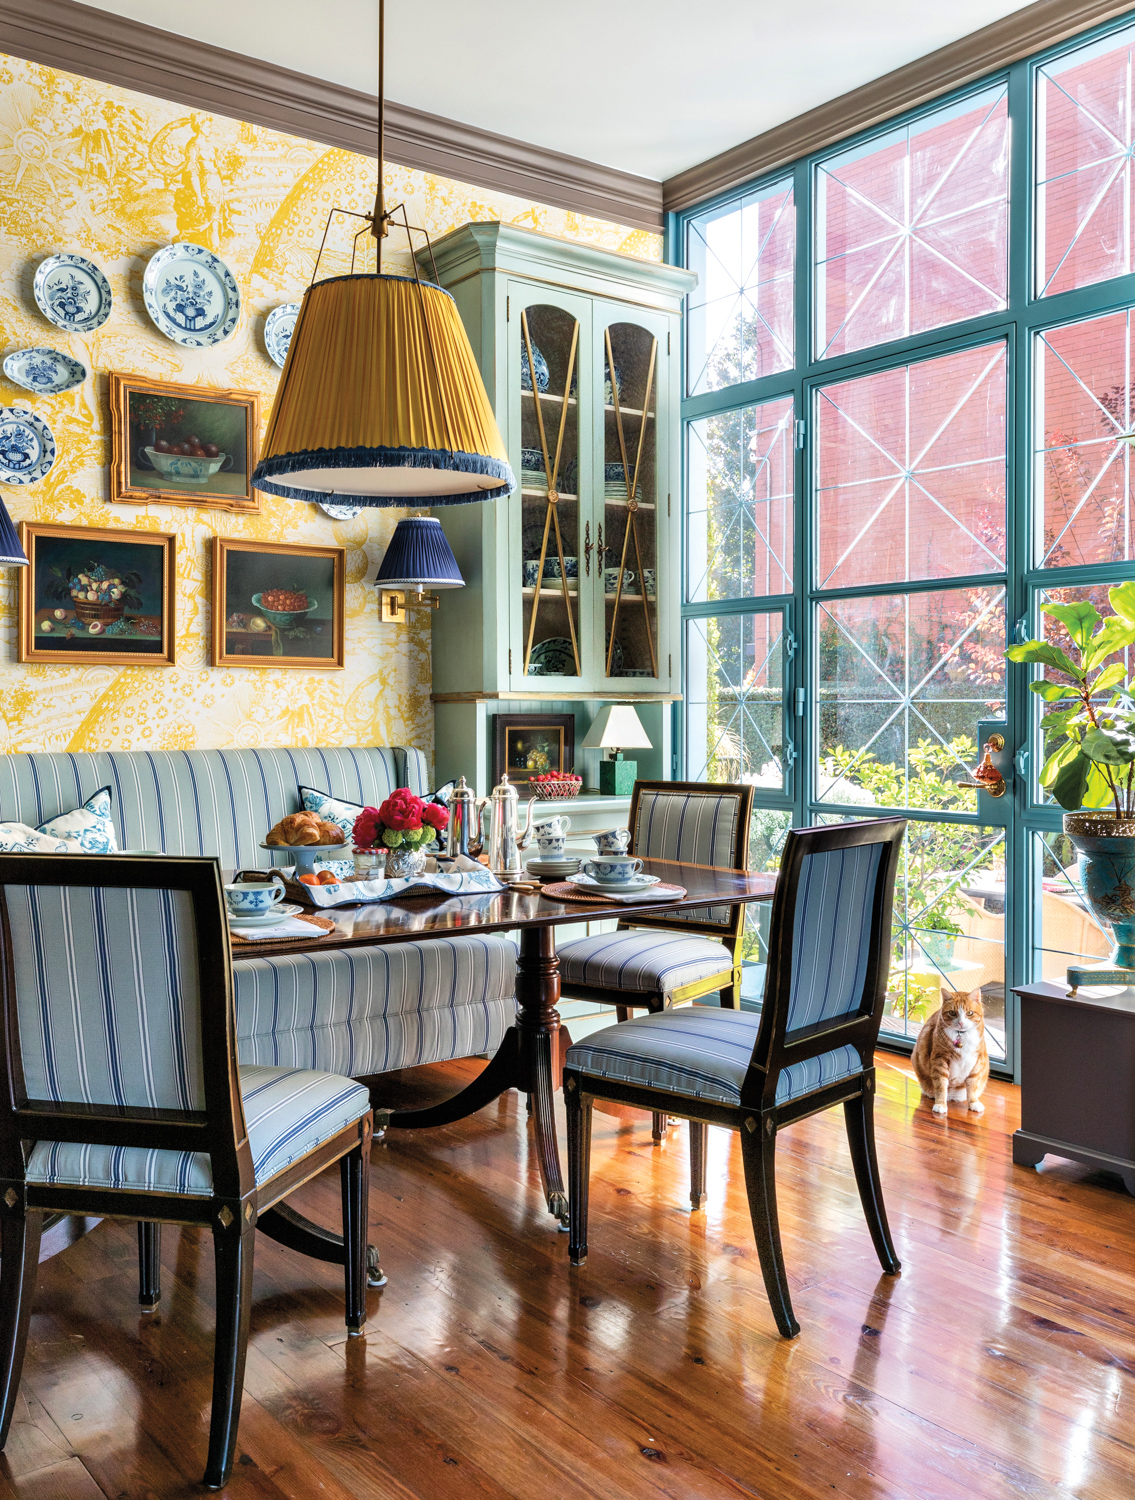 Breakfast room with yellow toile wallpaper, blue upholstery on the banquette and dining chairs, and blue paint on the built-in cabinetry